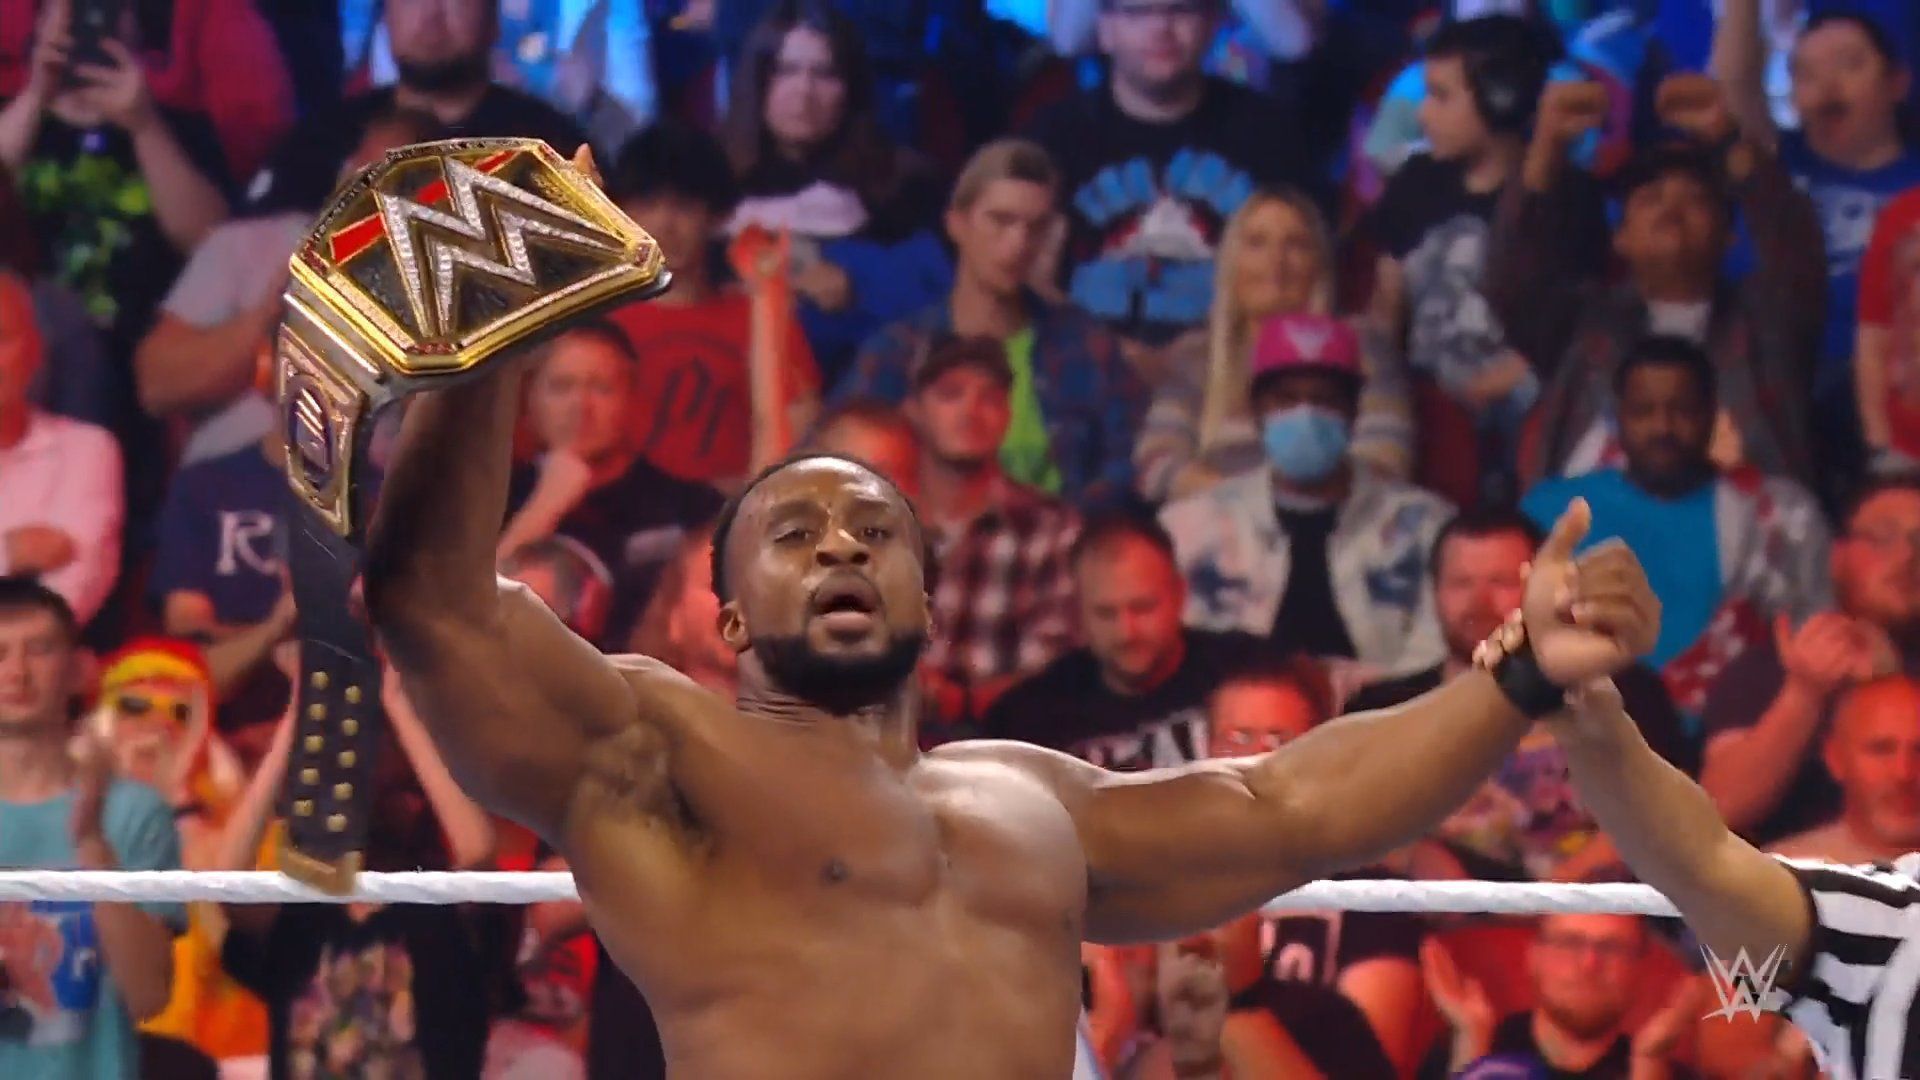 Another big win for the WWE Champ Big E!